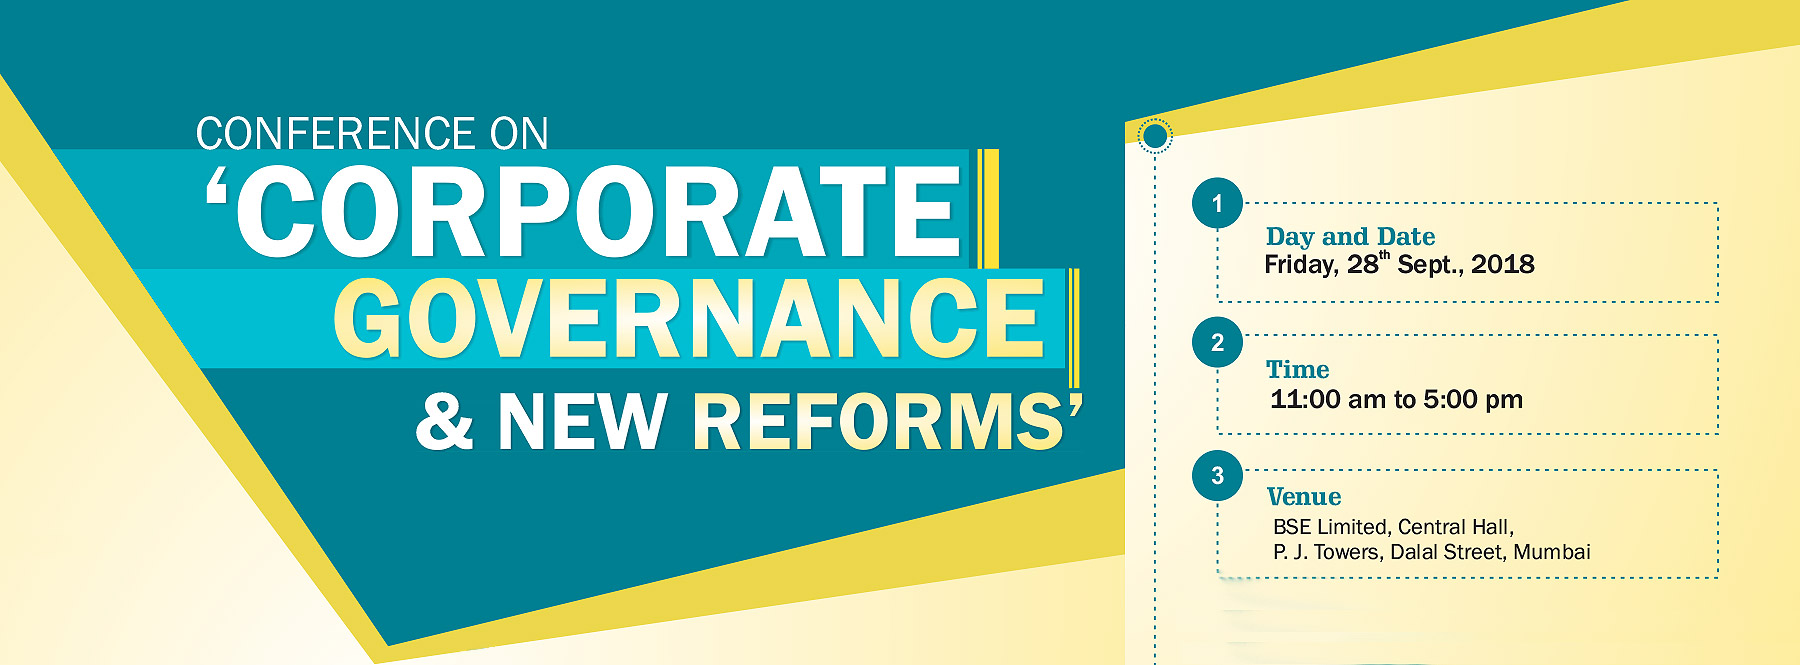 Conference on ‘Corporate Governance & New Reforms